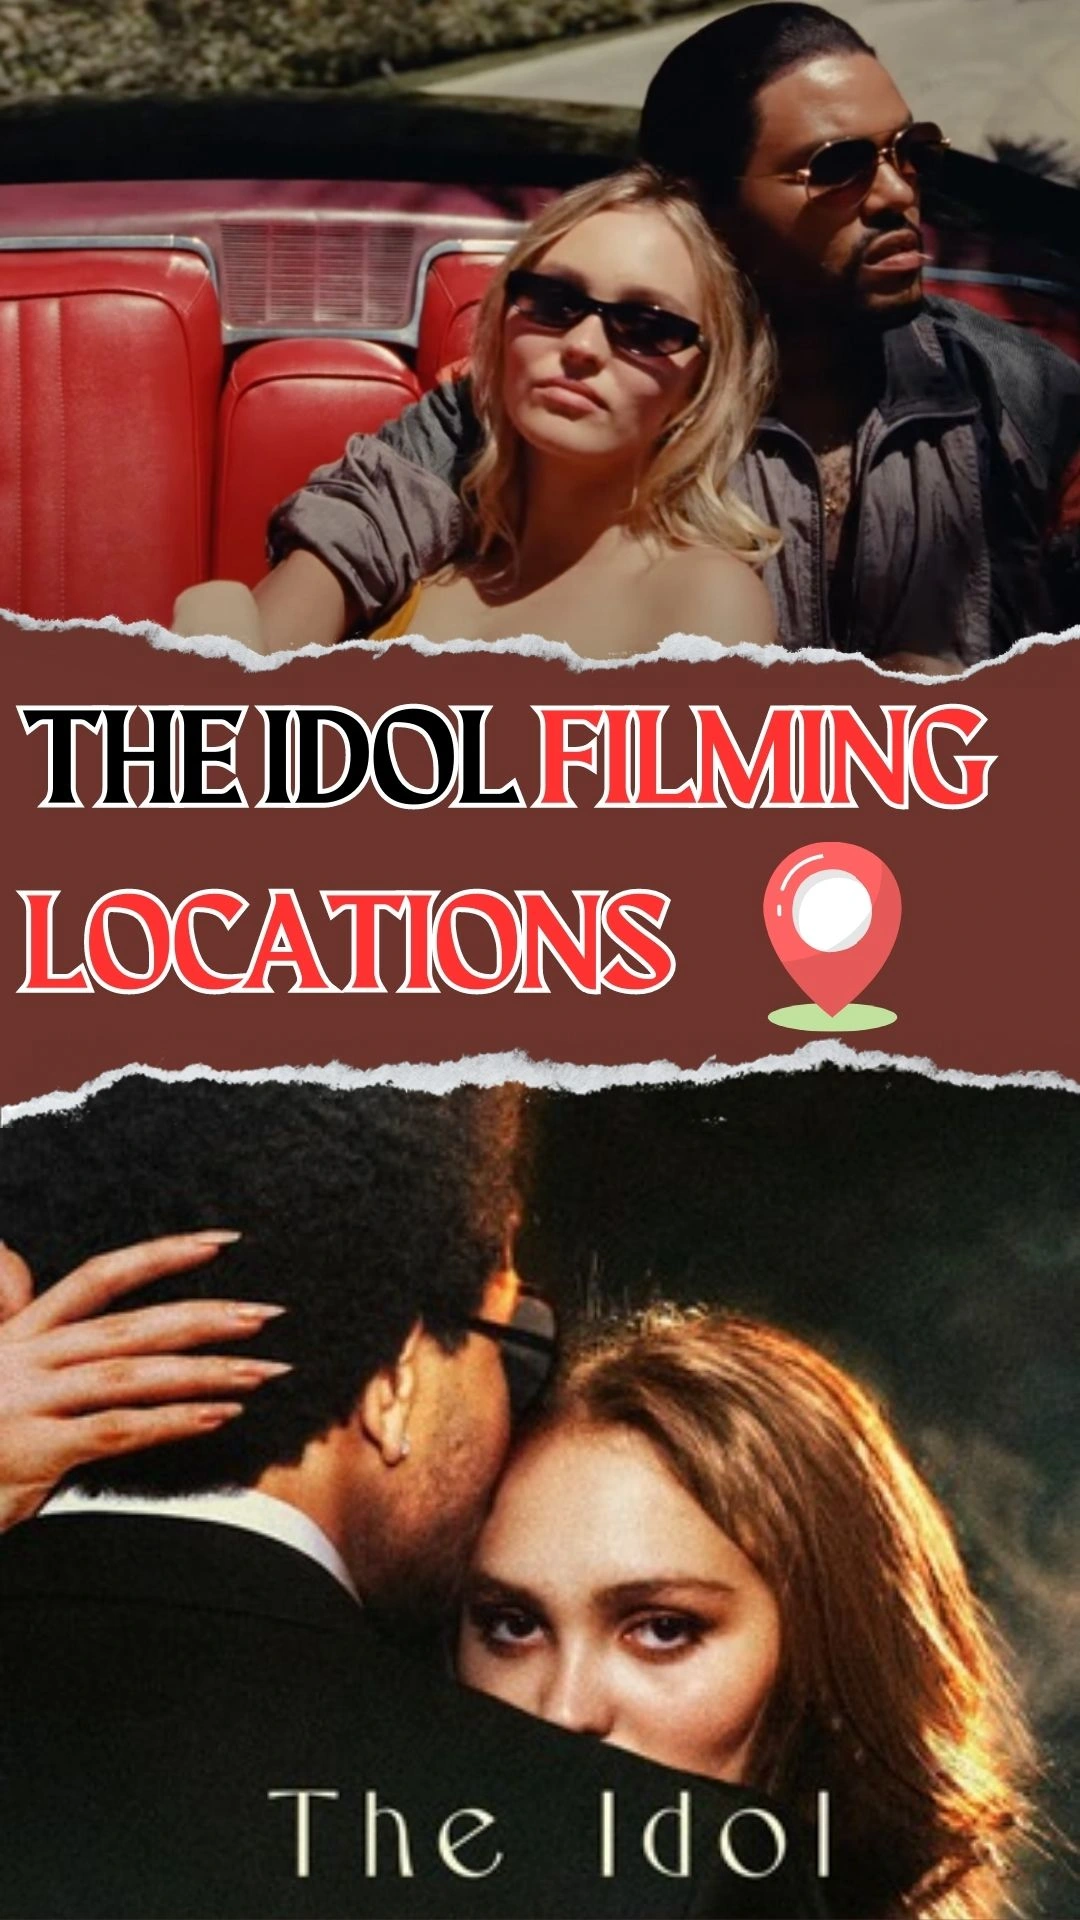 The Idol Filming Locations